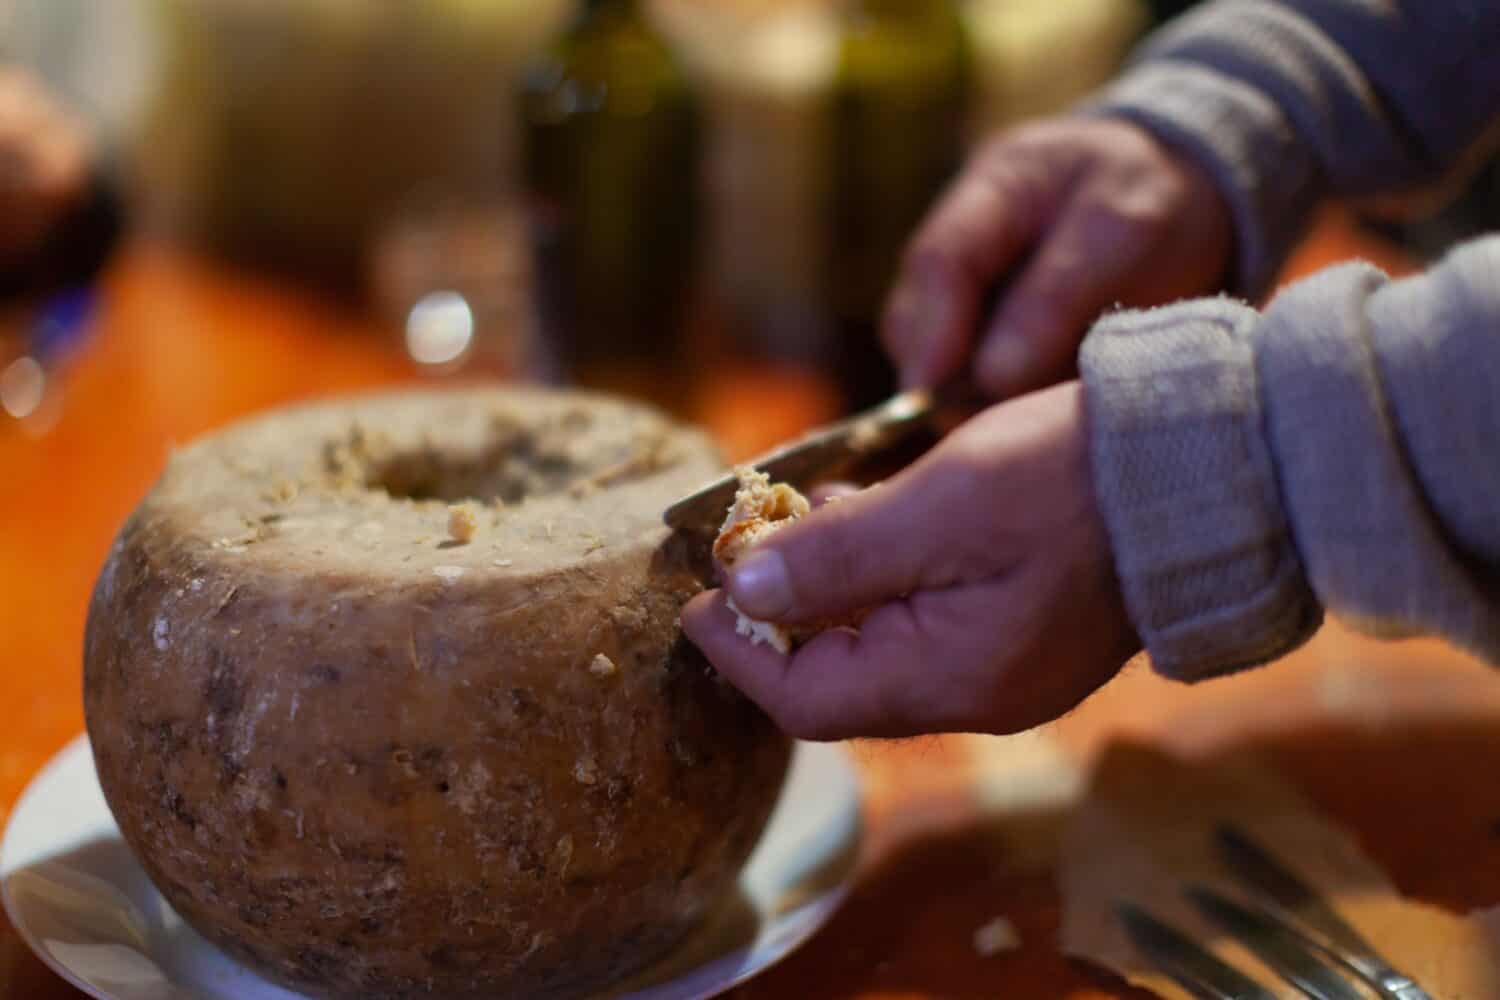 Famous Casu Marzu or Casu Martzu Cheese with Worms from Sardinia Italy Close Up. This pecorino cheese is over typical fermentation, and is closer to a stage of decomposition. Cheese with Worms.